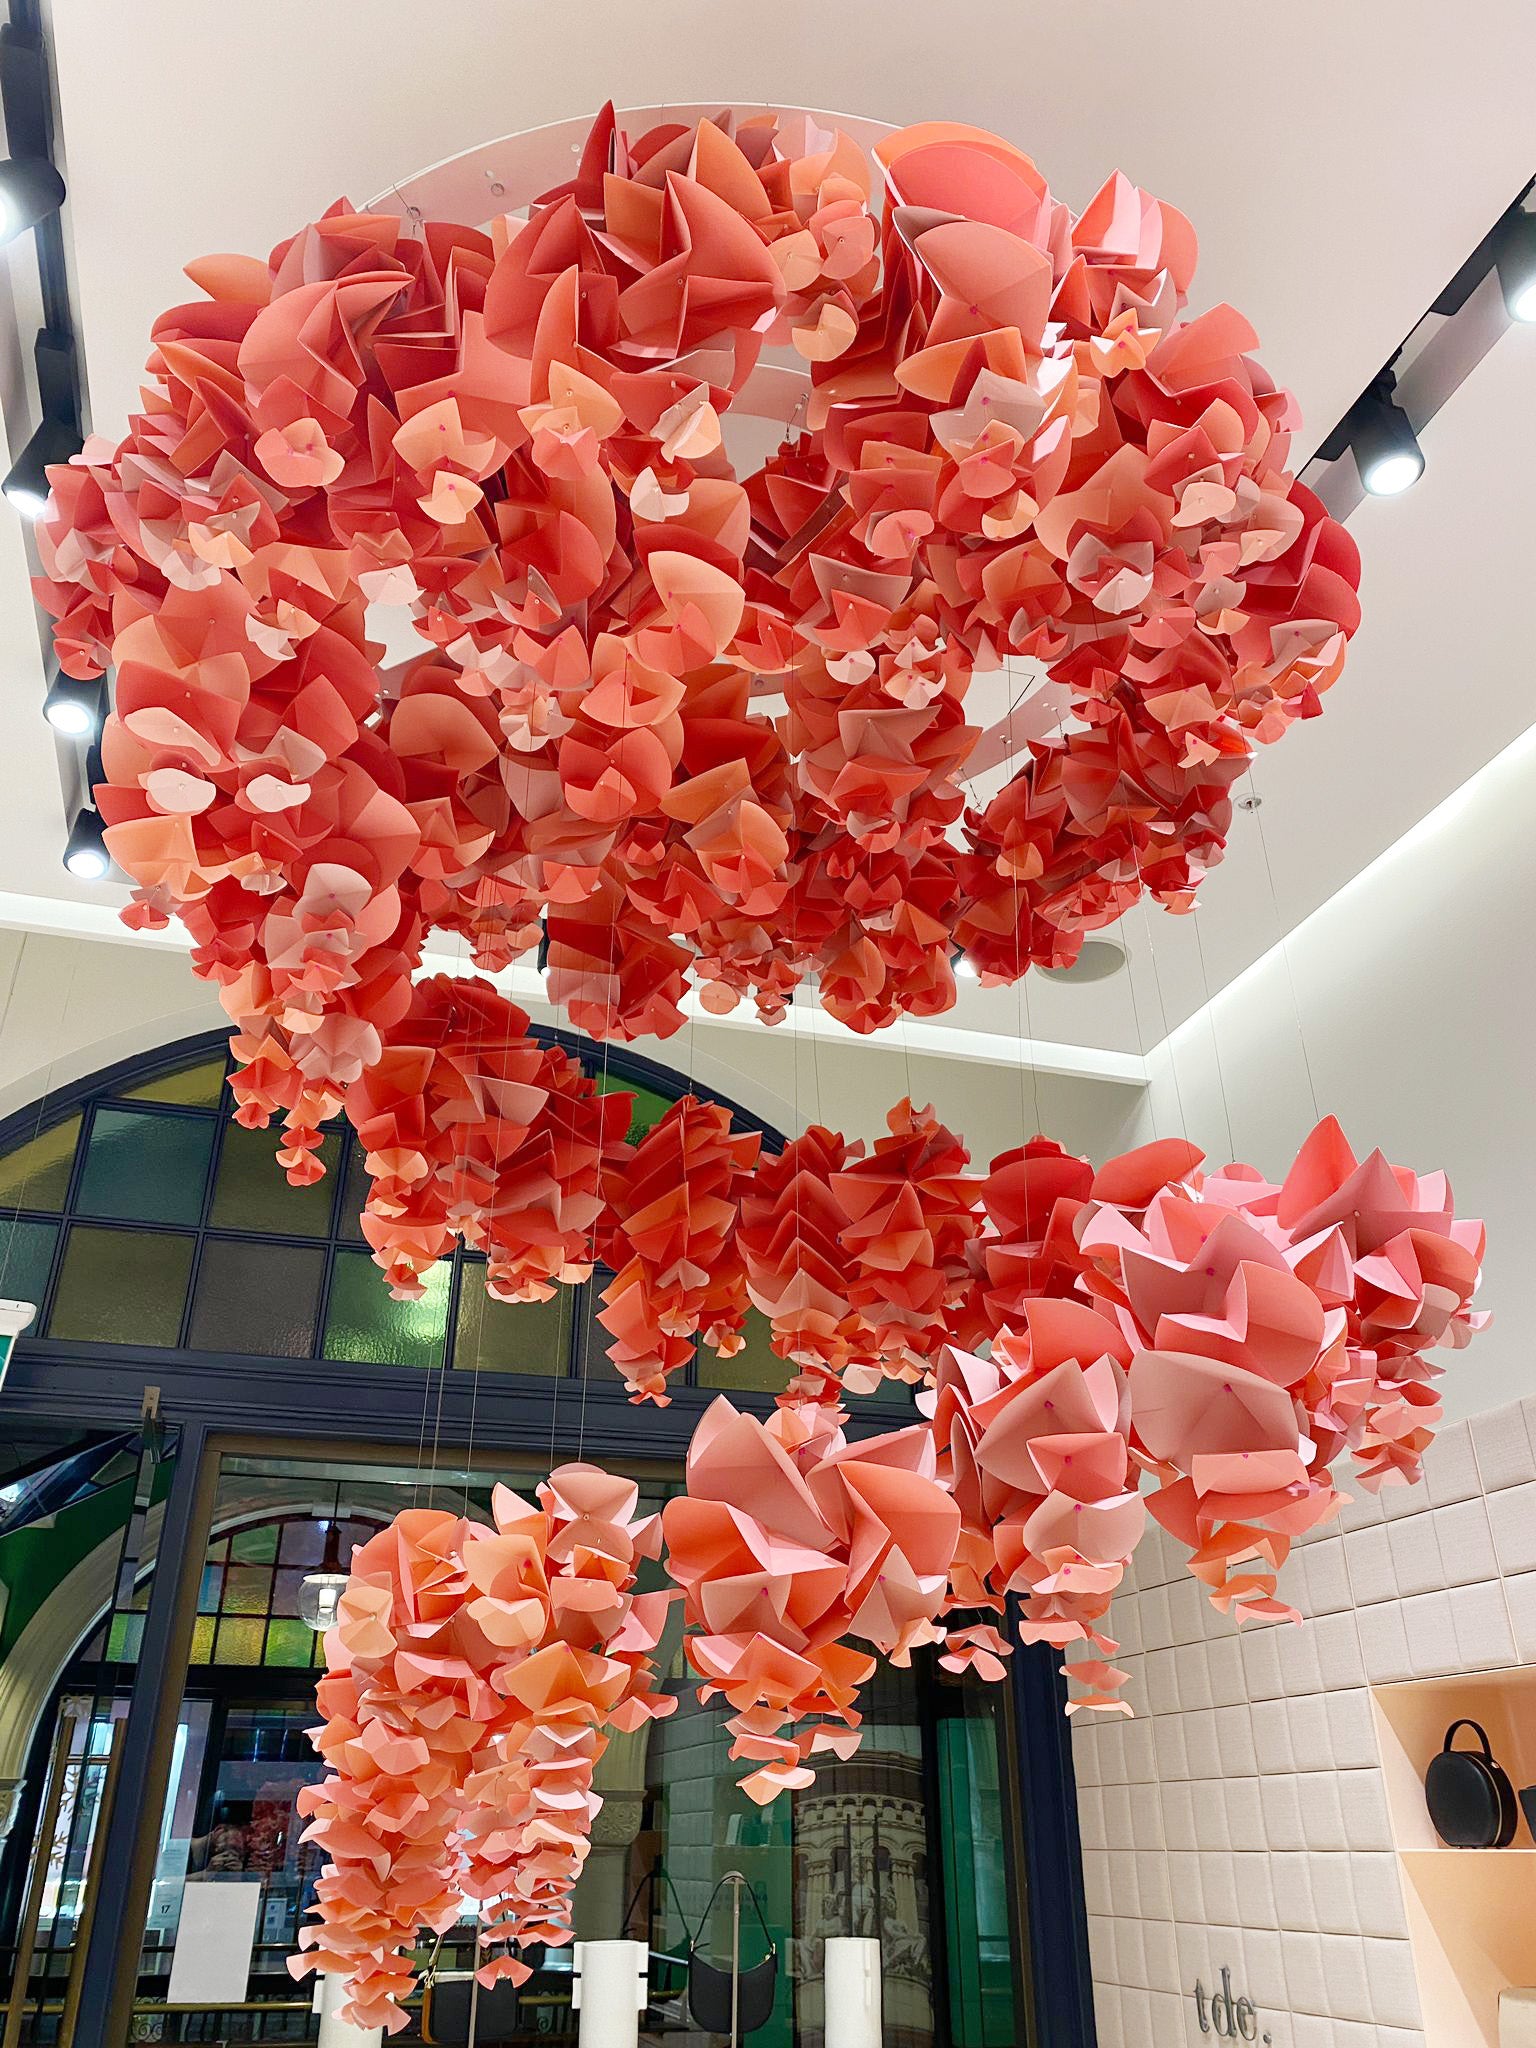 A large, pink, spiral-shaped papercraft petal installation hangs from the ceiling of a brightly lit retail store.